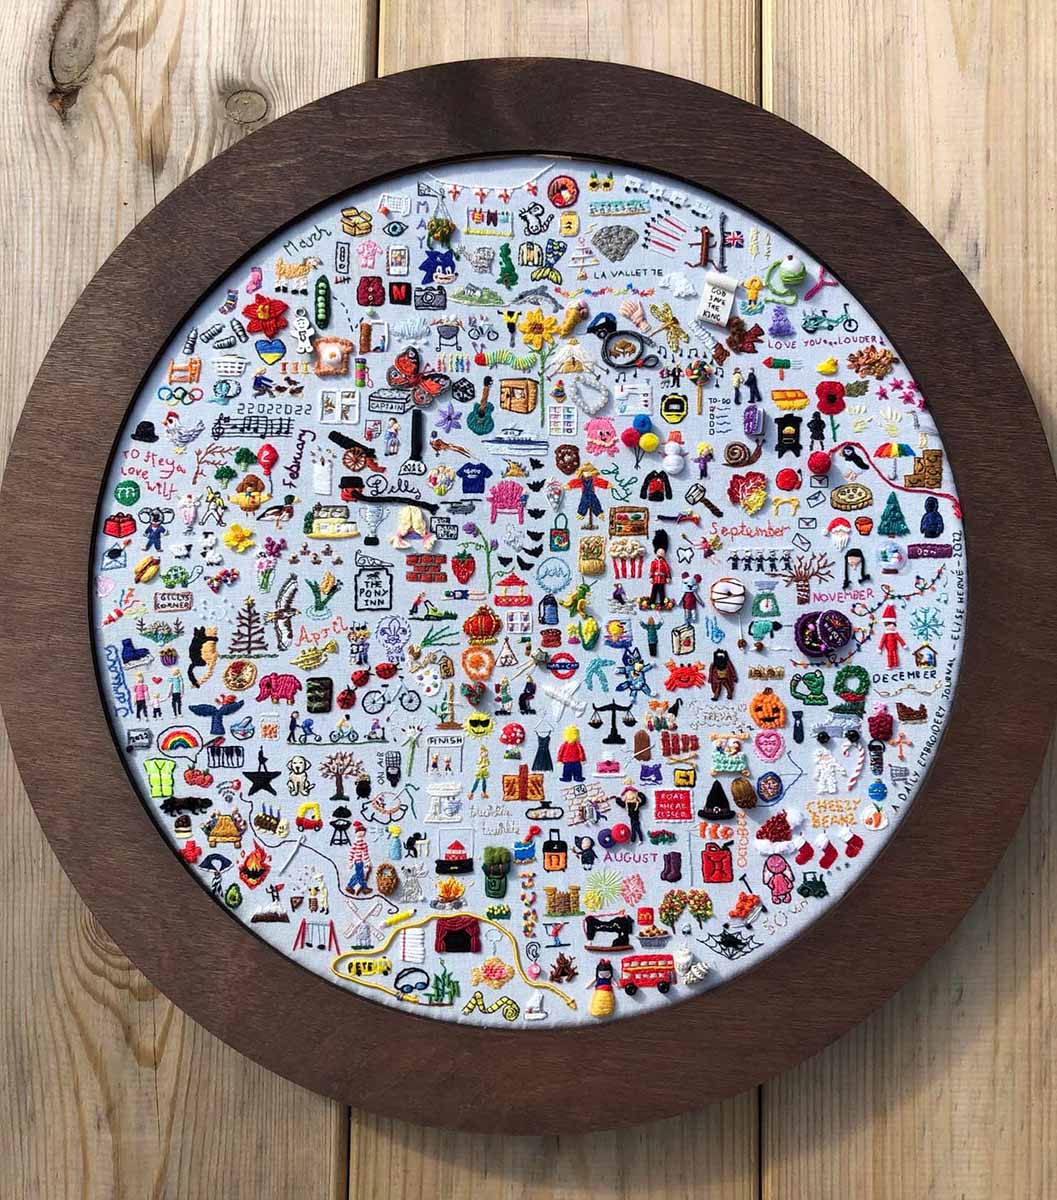 A finished Embroidery journal is featured in a gorgeous round, wooden frame without glass